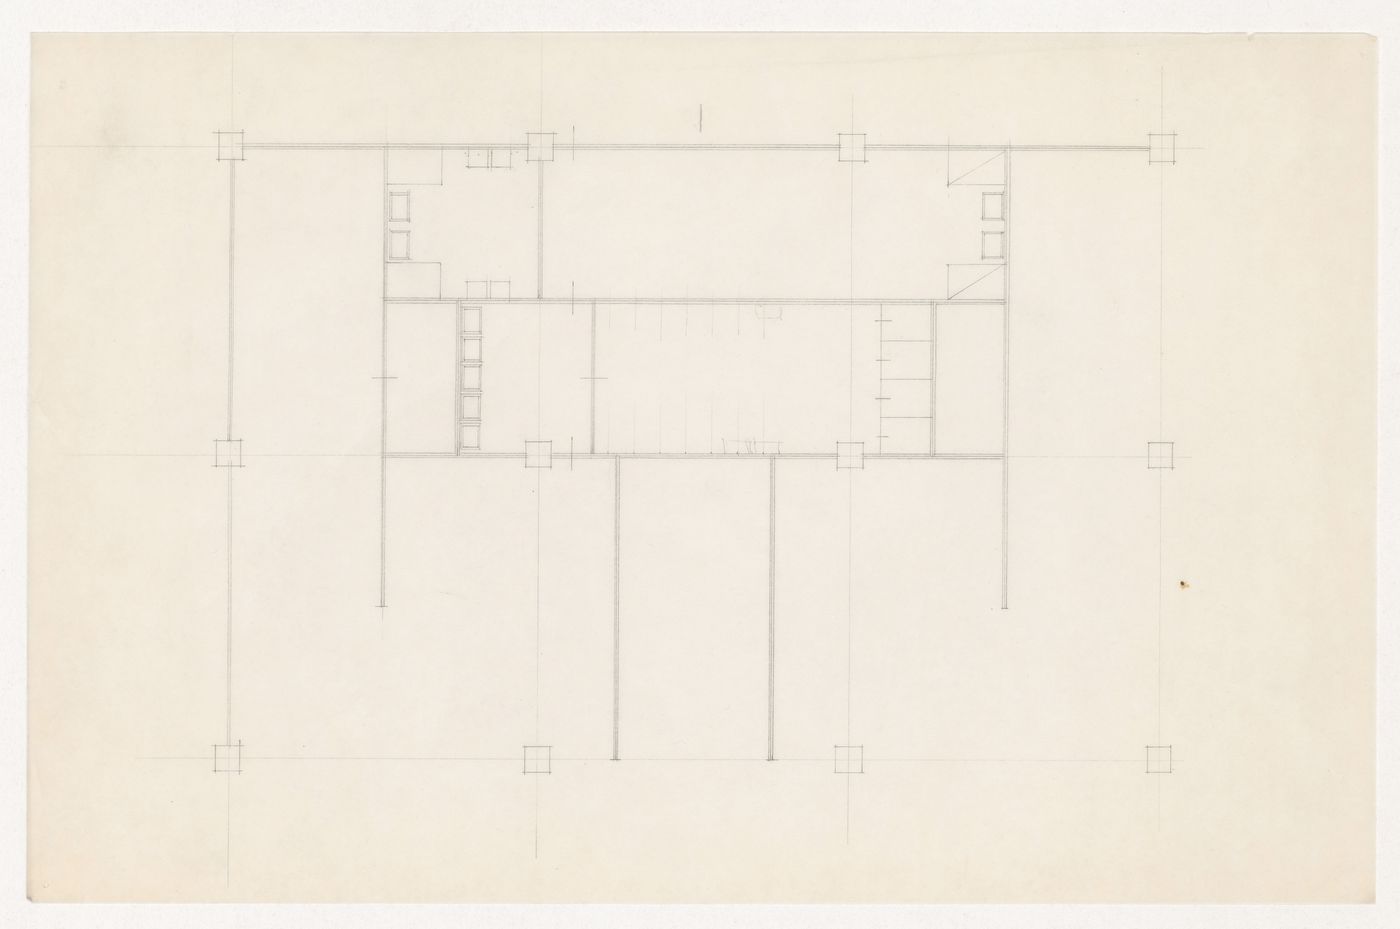 Partial plan, probably for the Metallurgy Building, Illinois Institute of Technology, Chicago